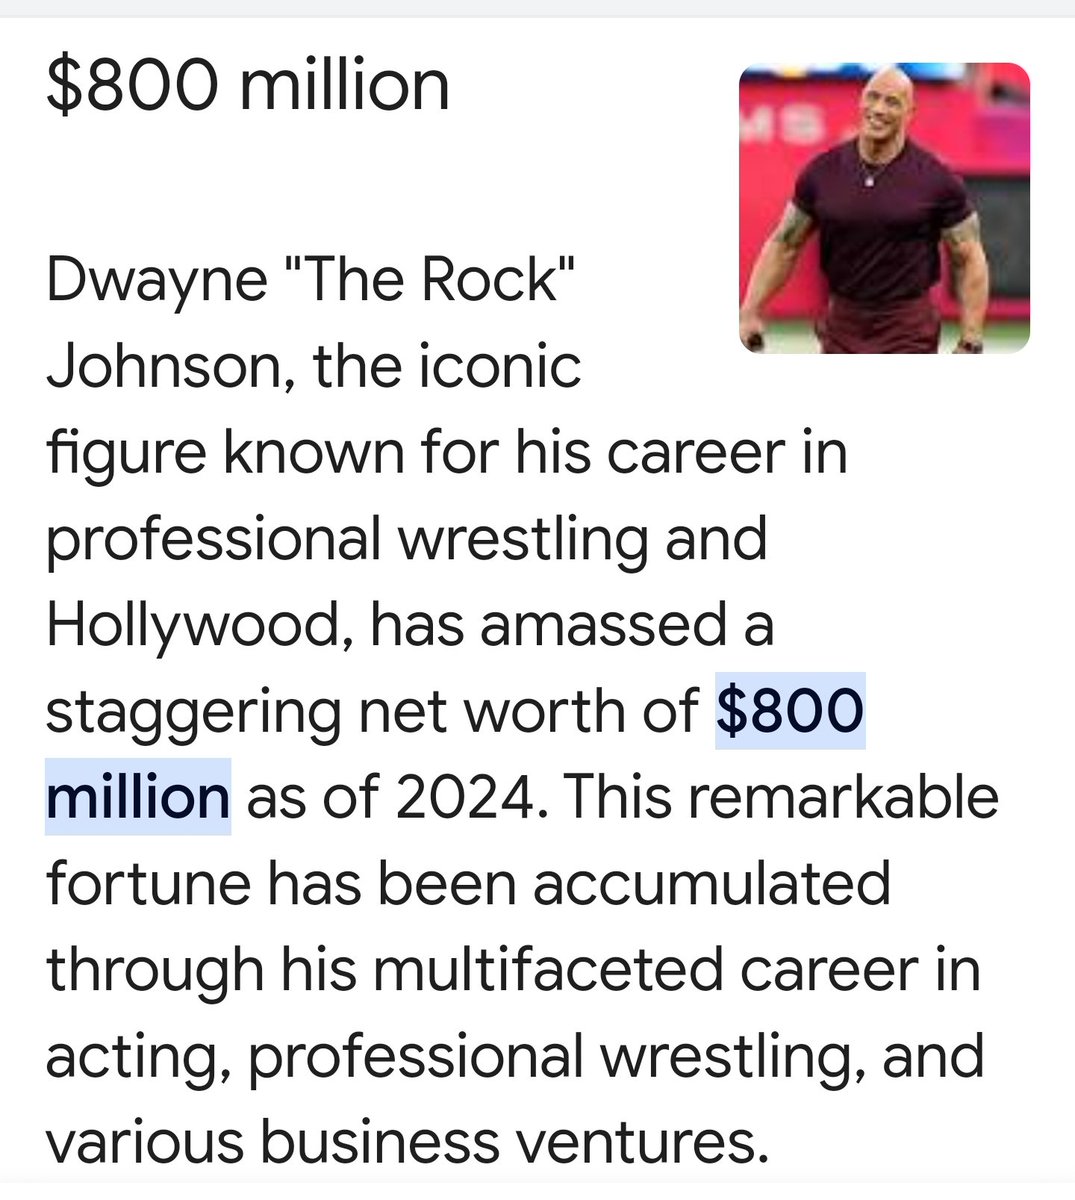 @JennJVN @ifudontlike2bad @TheRock He'll have his $ so he can ✈ them anywhr 4 their hlthcare. He doesn't want to rock (pun intended) the ⛵ with his WWE deal. He knew what and how he was saying what he said. So disappointing. 

Who knows..since he backed Joe in 2020 this interview could have been part of the deal